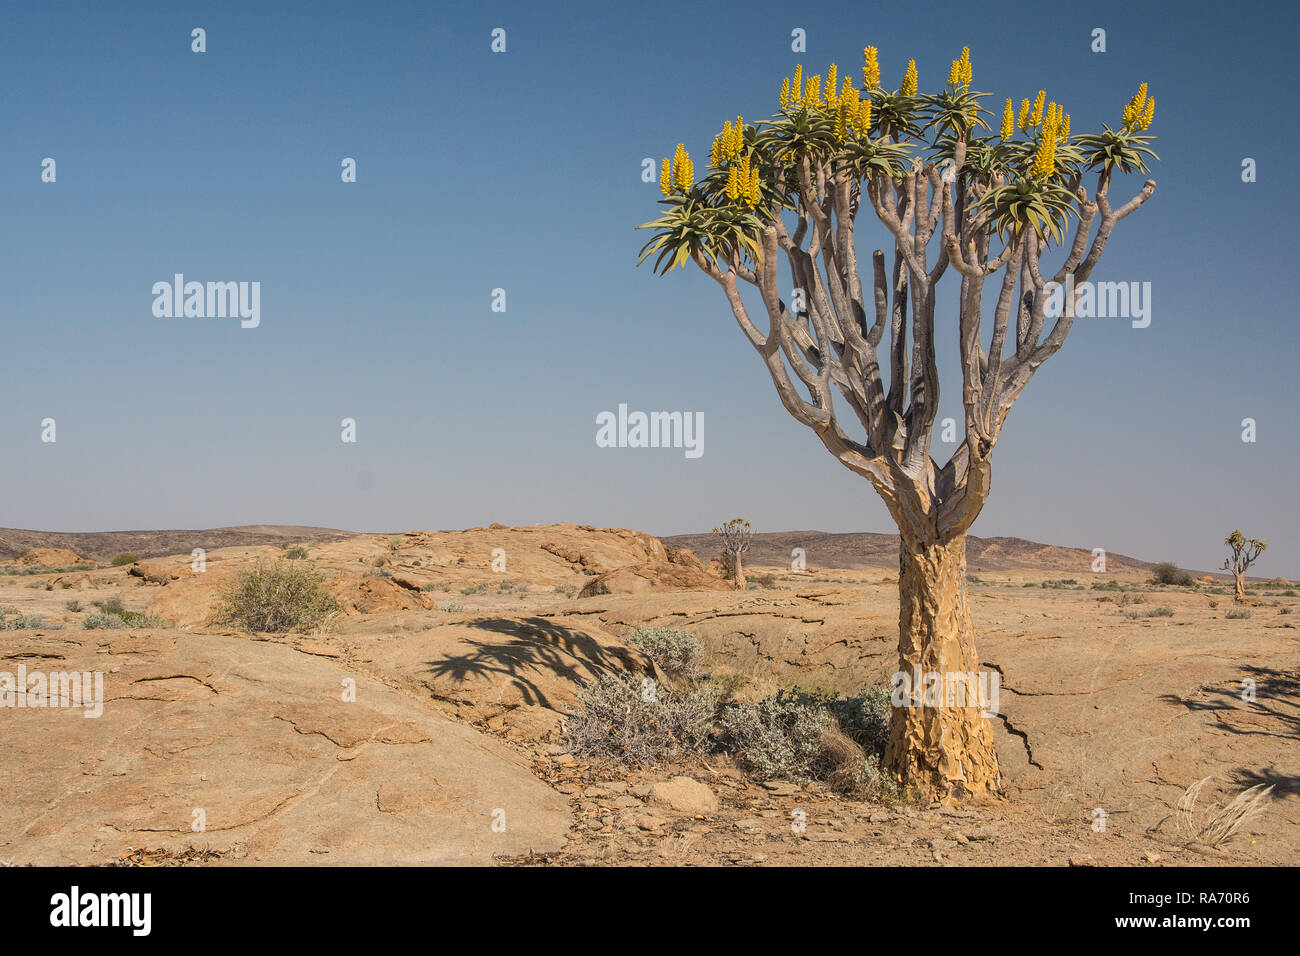 Quiver tree in the namibien desert Stock Photo